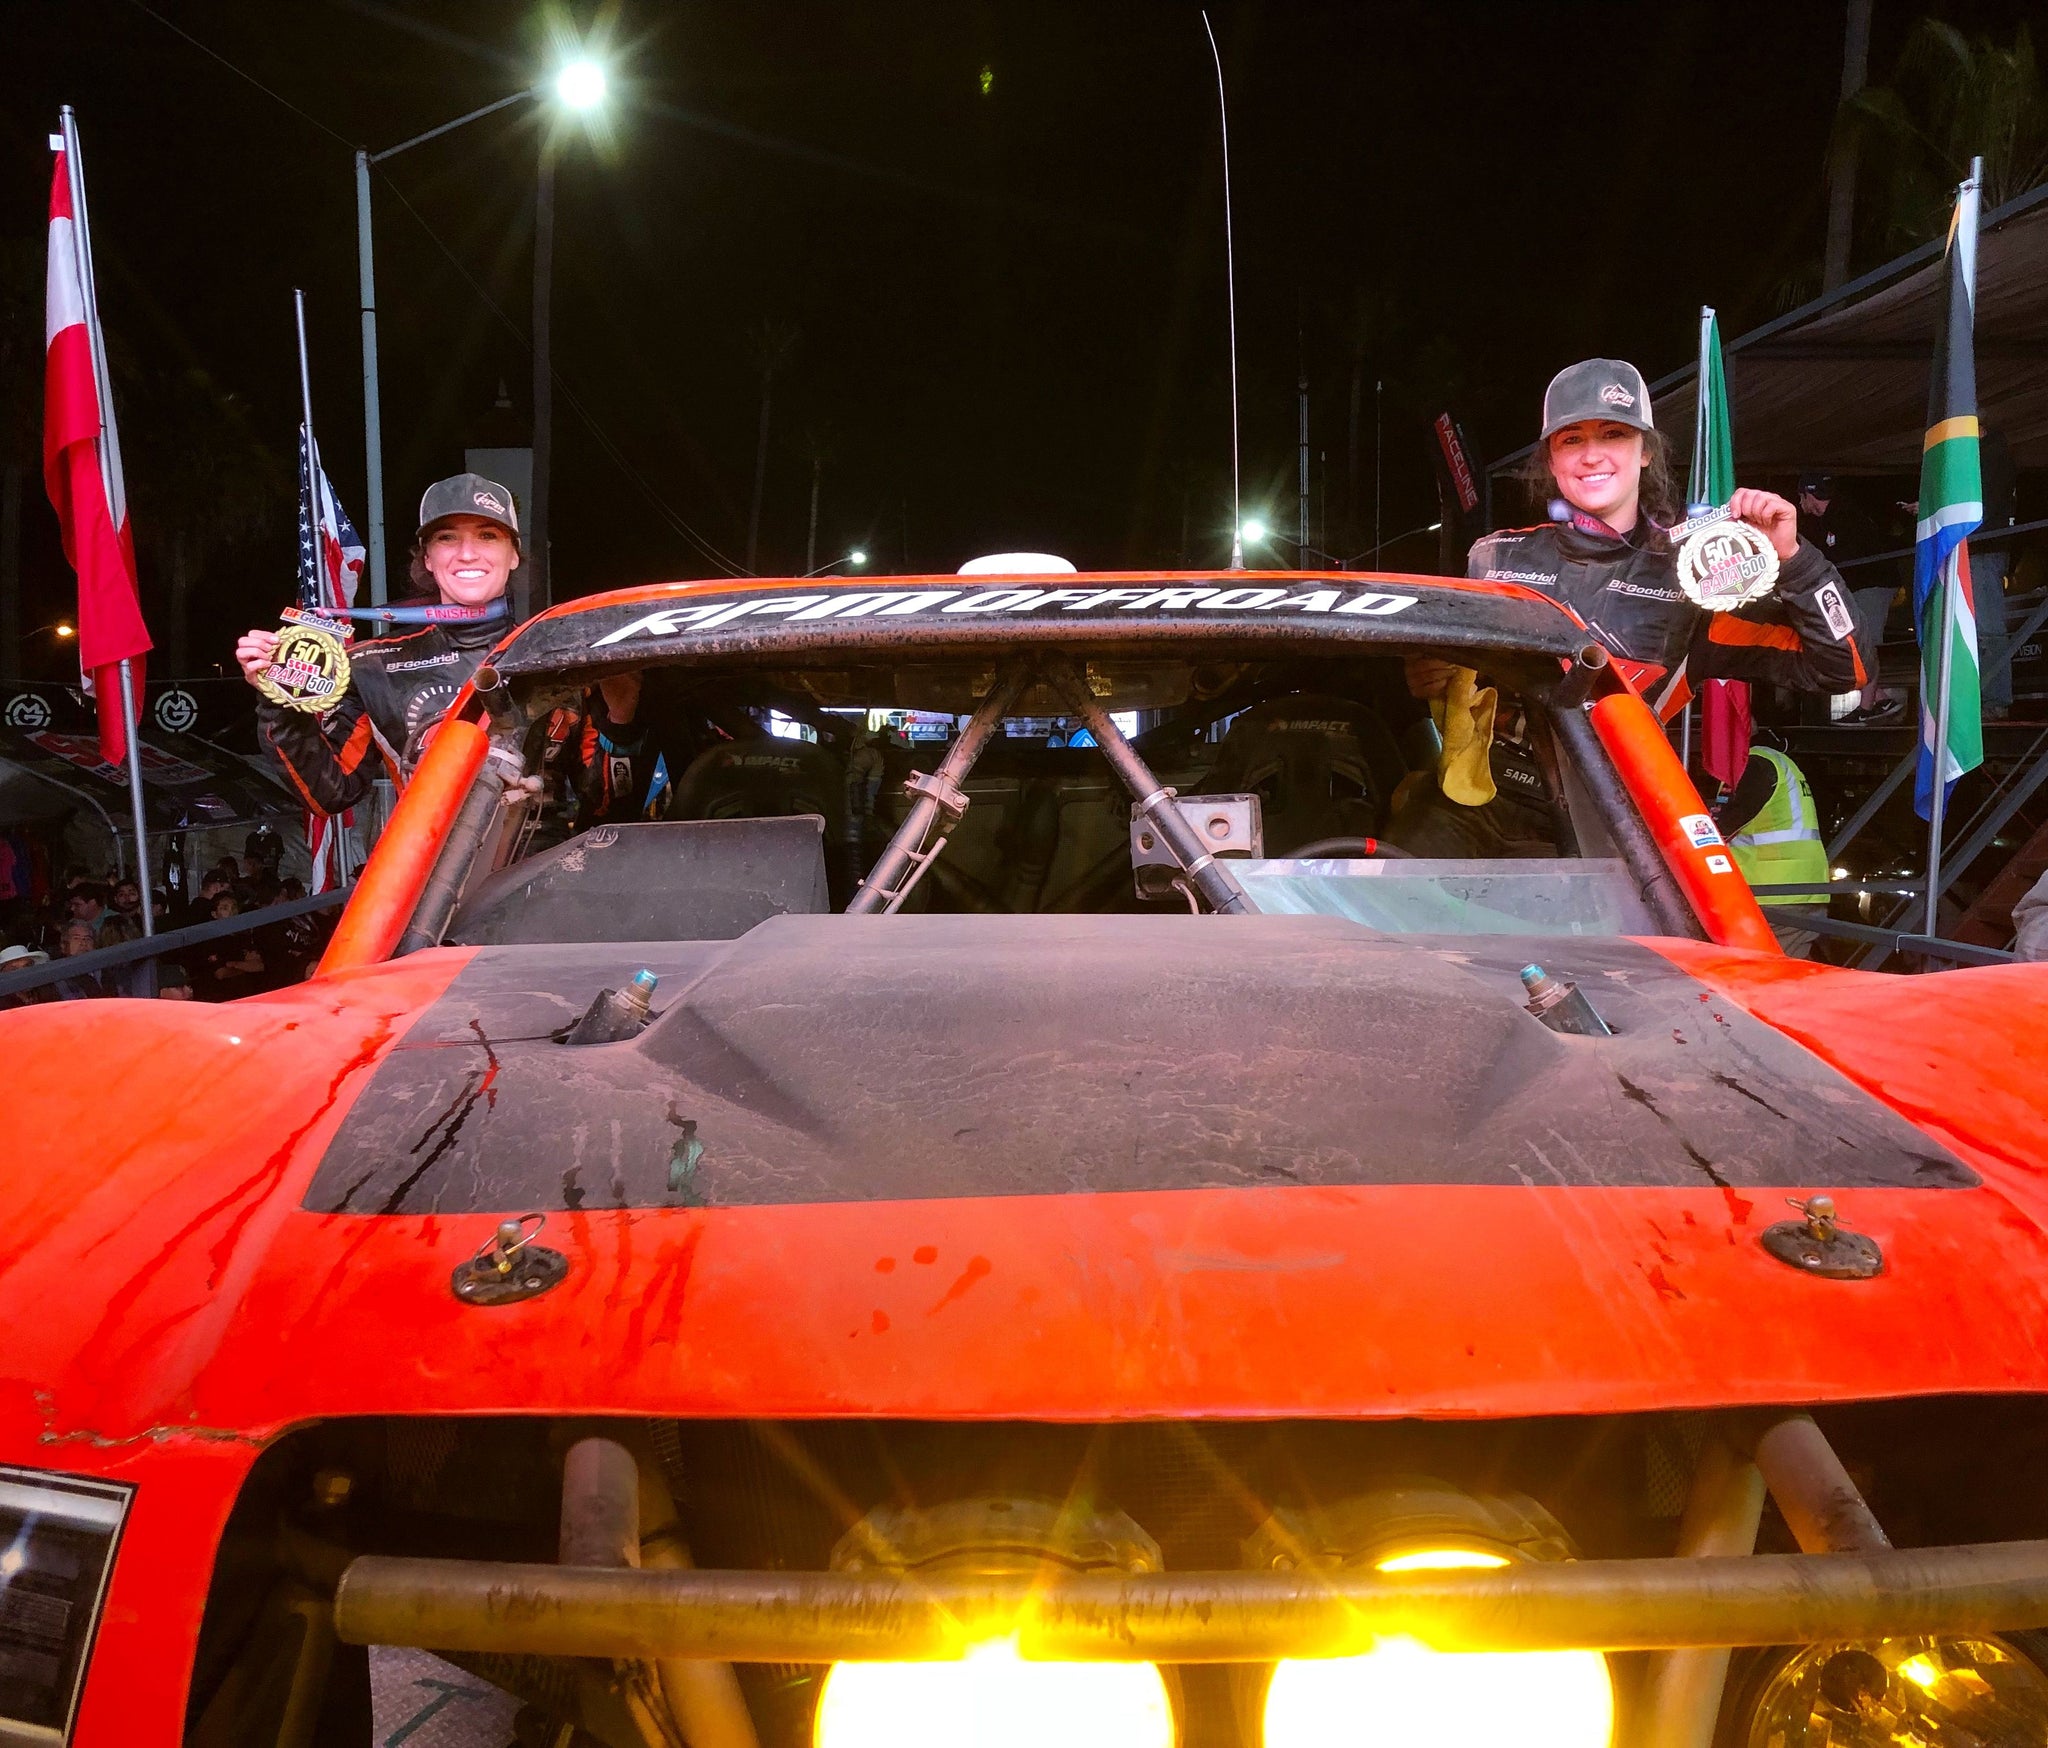 Sara Price officially completed her first ever SCORE International BAJA 500